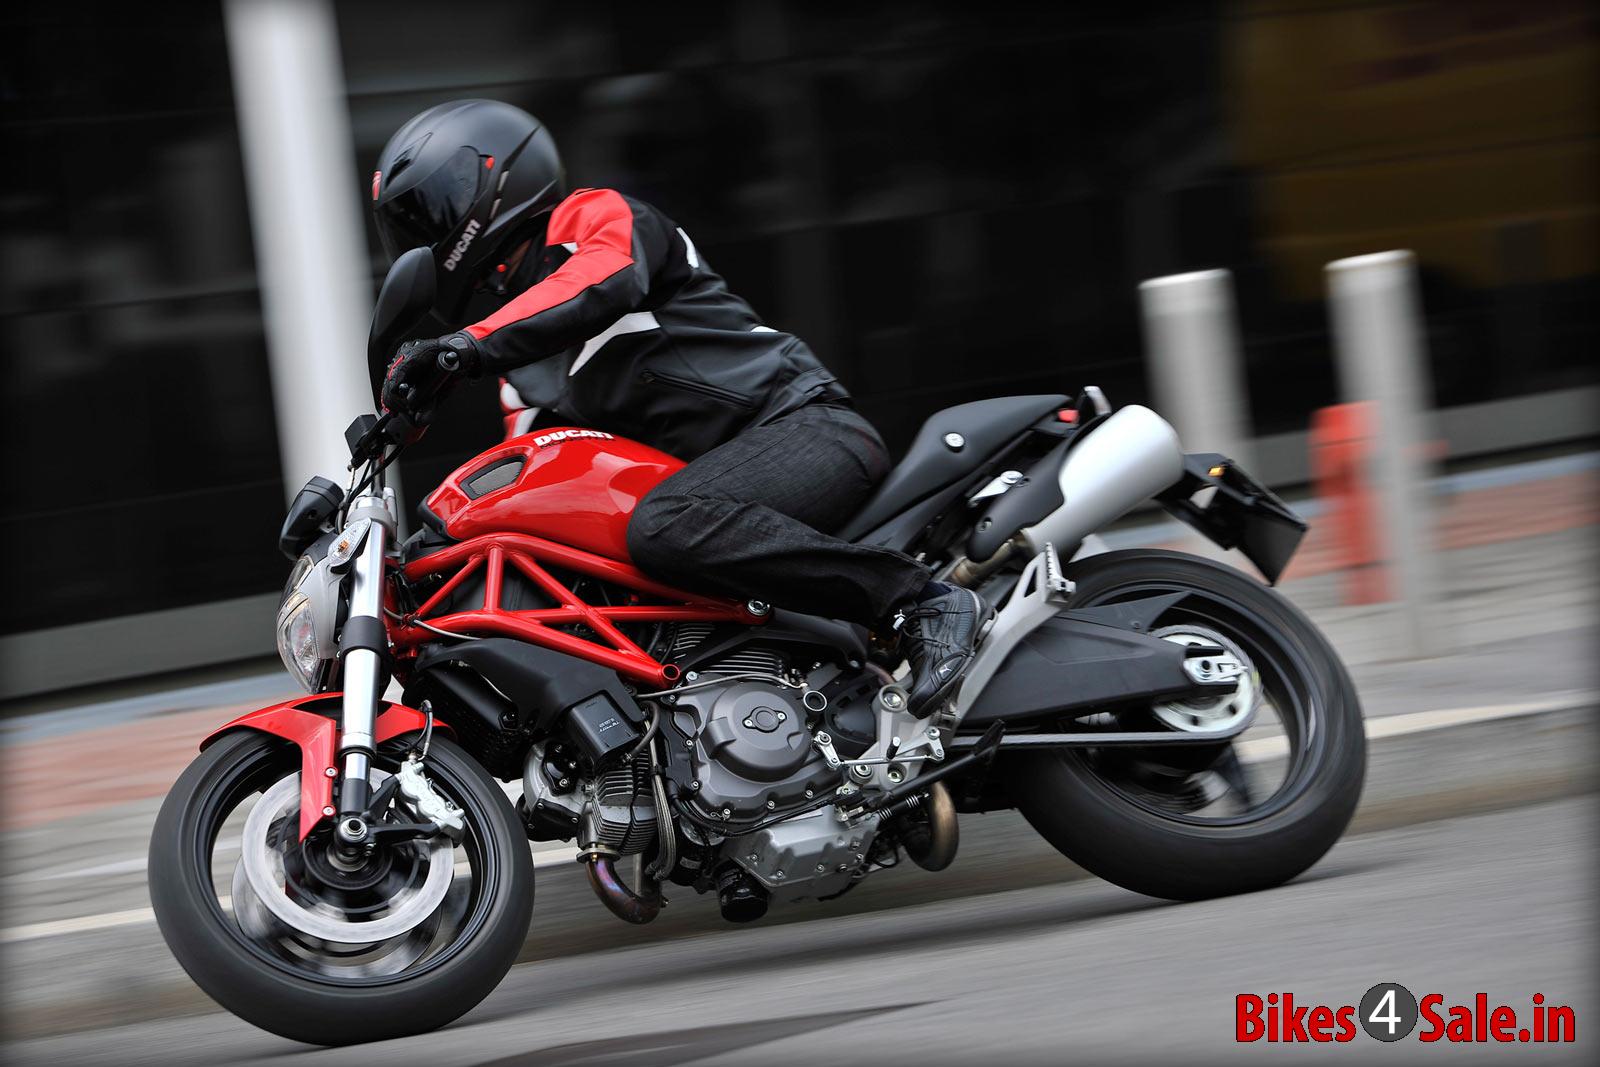 Photo 3. Ducati Monster 795 Motorcycle Picture Gallery - Bikes4Sale